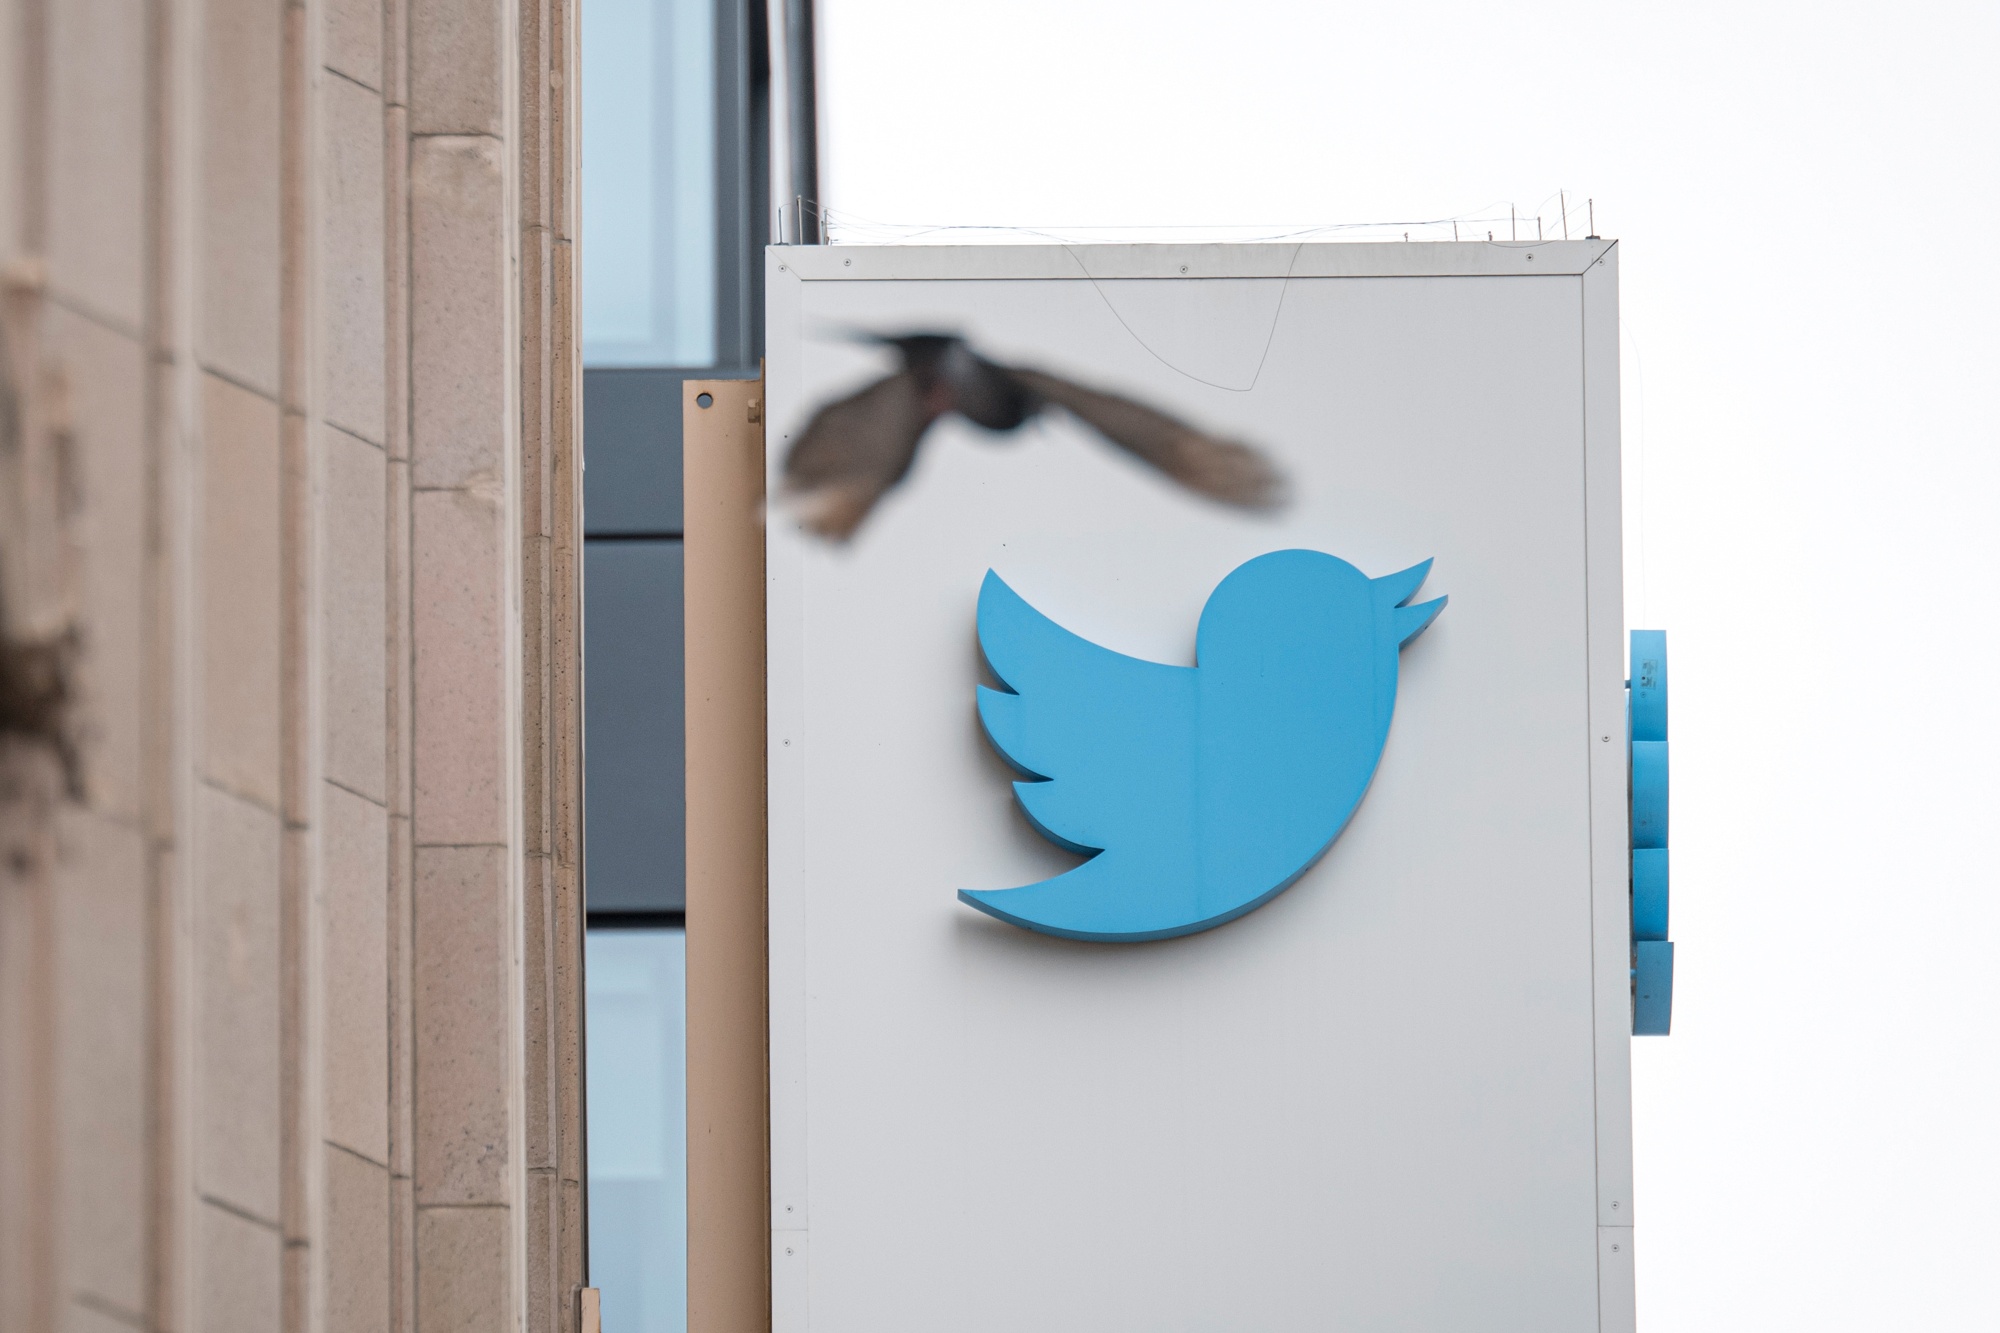 Twitter Daily Users Rise to 186 Million, CEO Jack Dorsey Talks